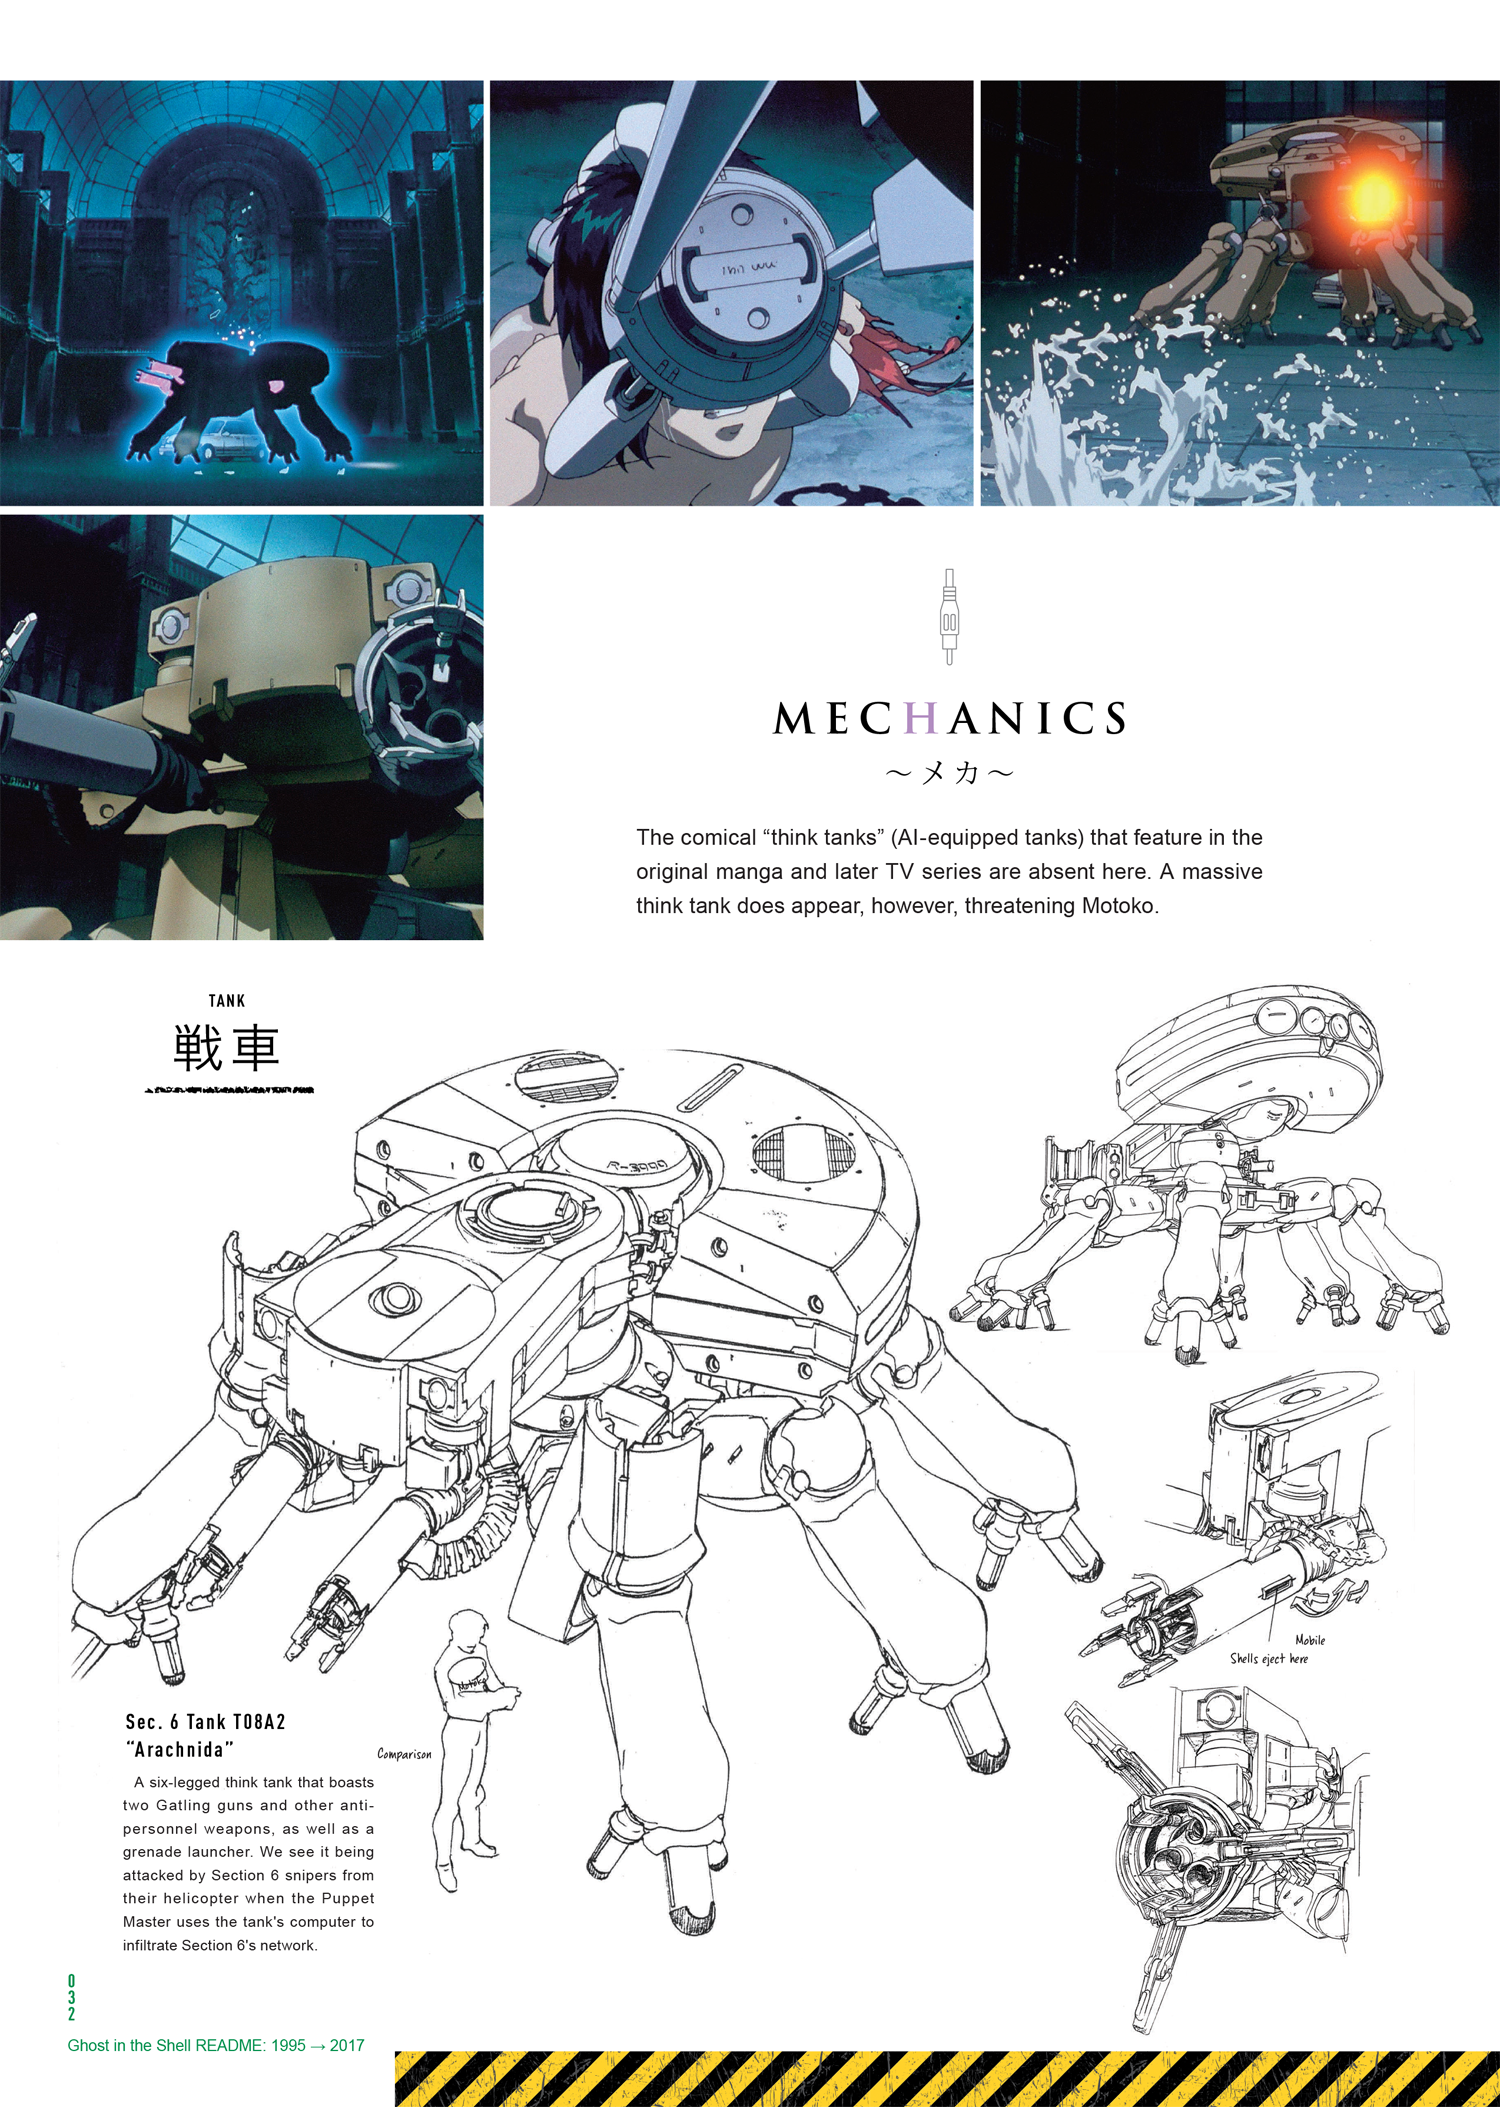 The Stunning Art Behind 20 Years Of Ghost In The Shell Anime